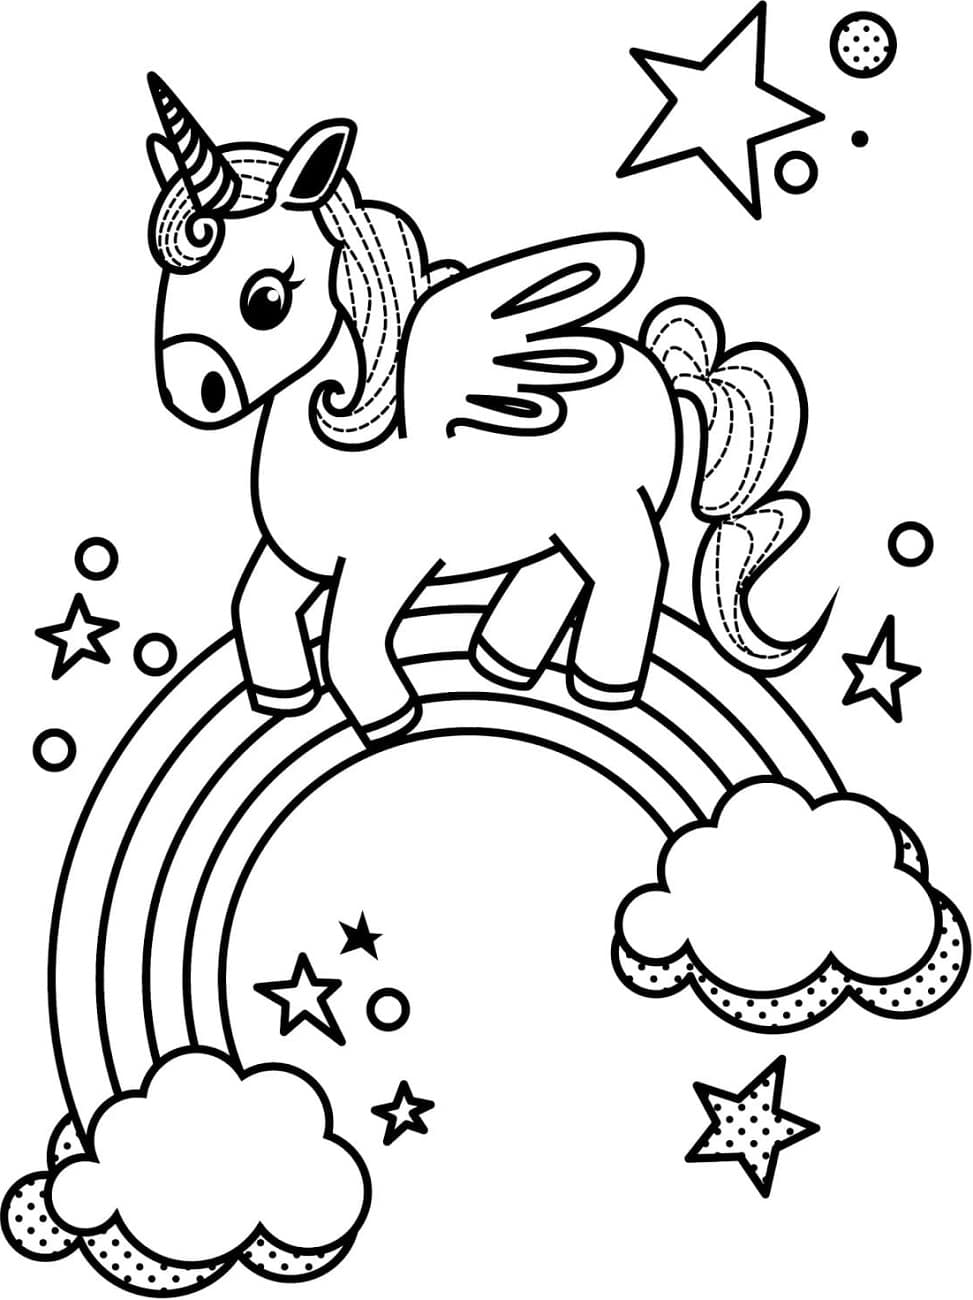 Little Unicorn And Rainbow Coloring Page   Free Printable ...